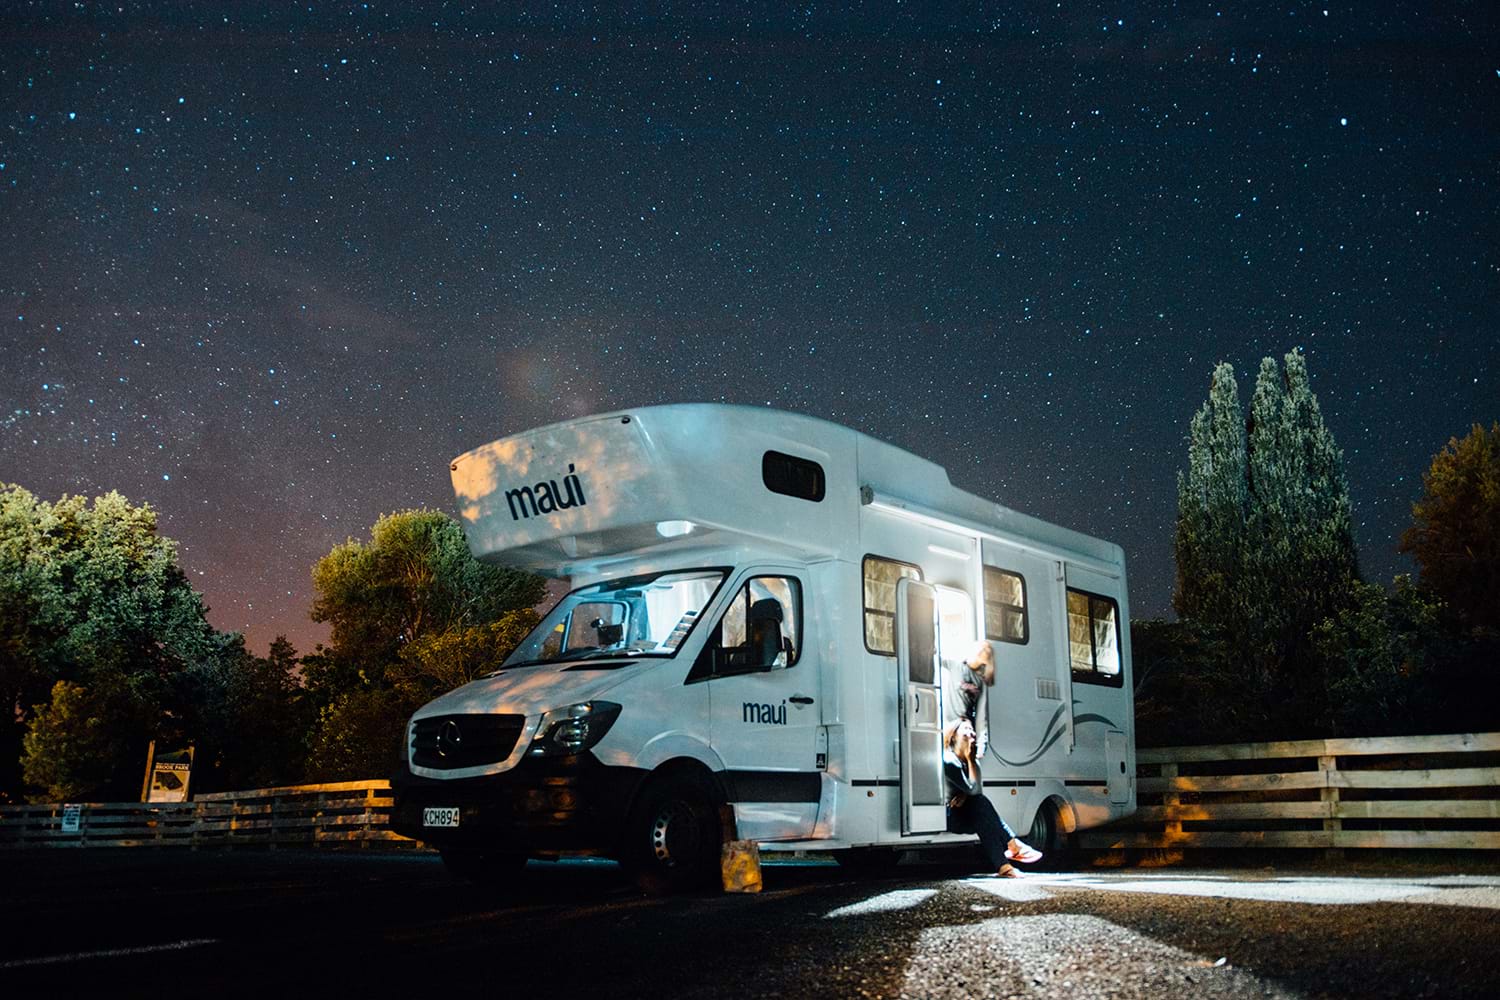 Camper parked in lot with starry sky above